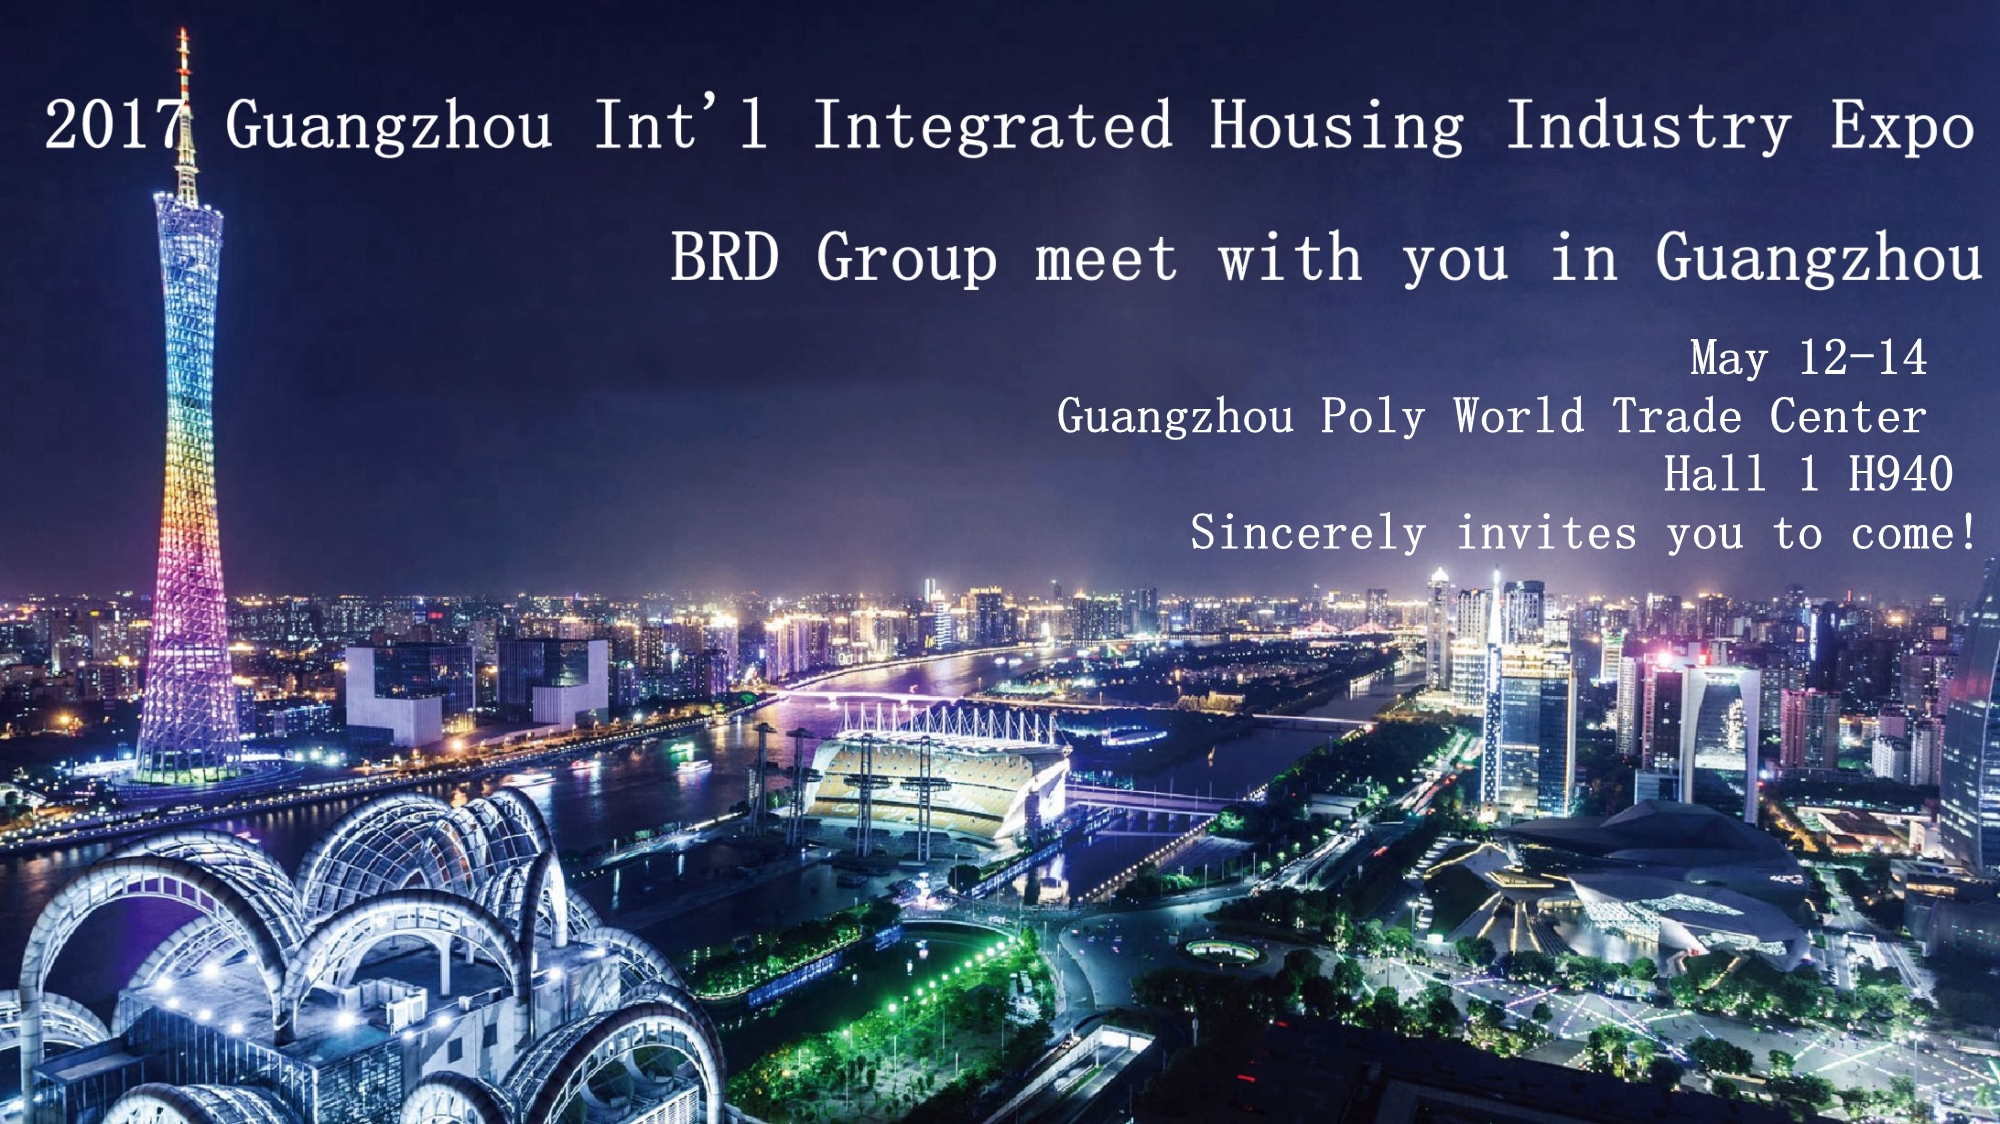 <b>2017 Guangzhou Int'l Integrated Housing Industry Expo, BRD meet with you!</b>